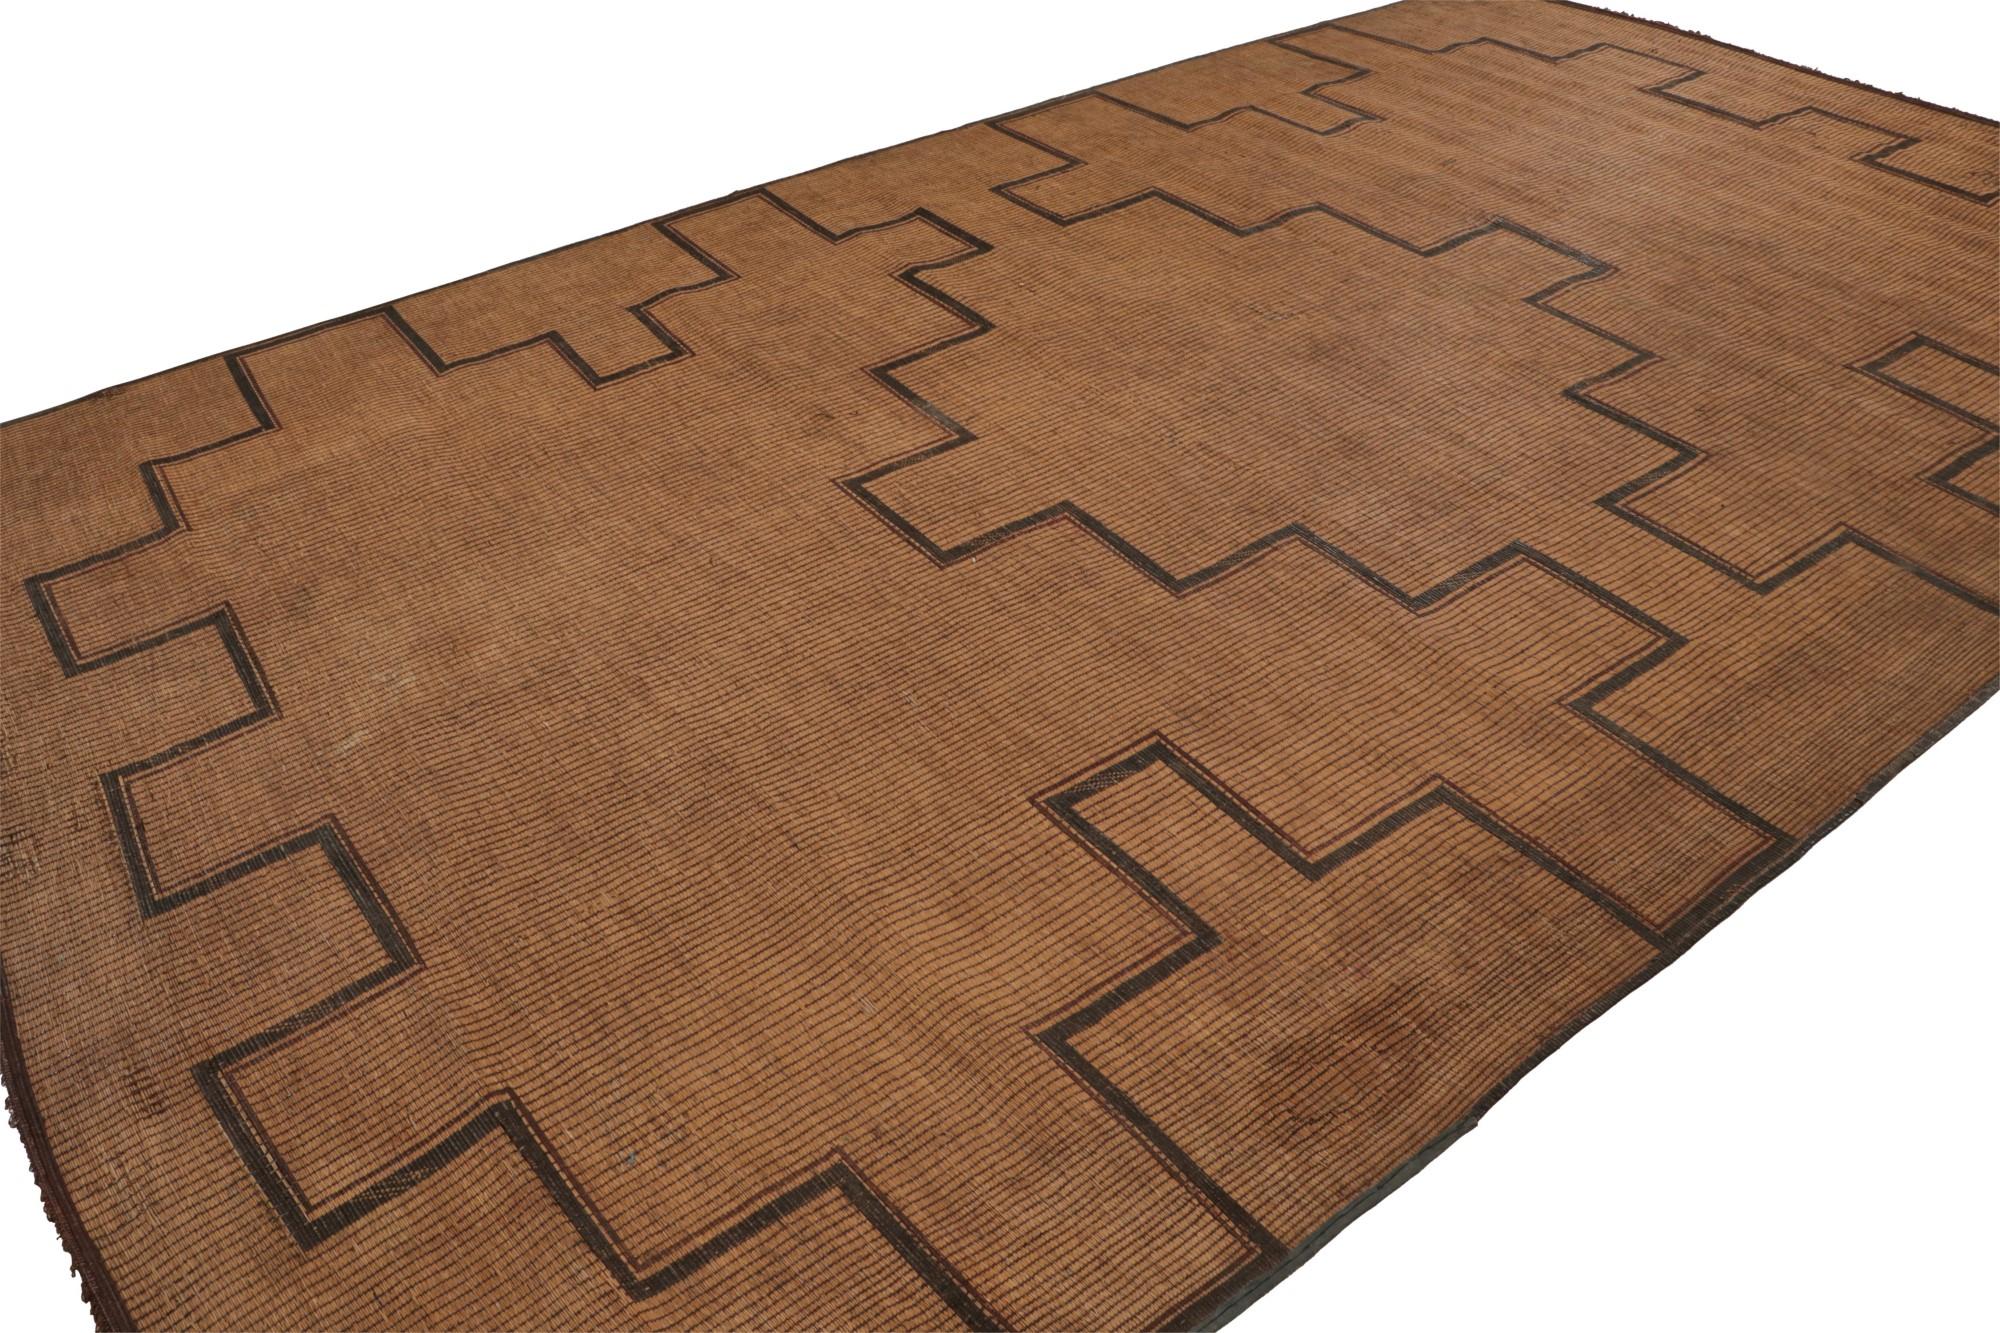 Hand-woven in reed and leather circa 1940-1950, this 10x16 vintage Tuareg Moroccan area rug is from the nomadic tribe of the same name. A rare large-size selection, its design enjoys warm beige undertones and rich brown geometric patterns in